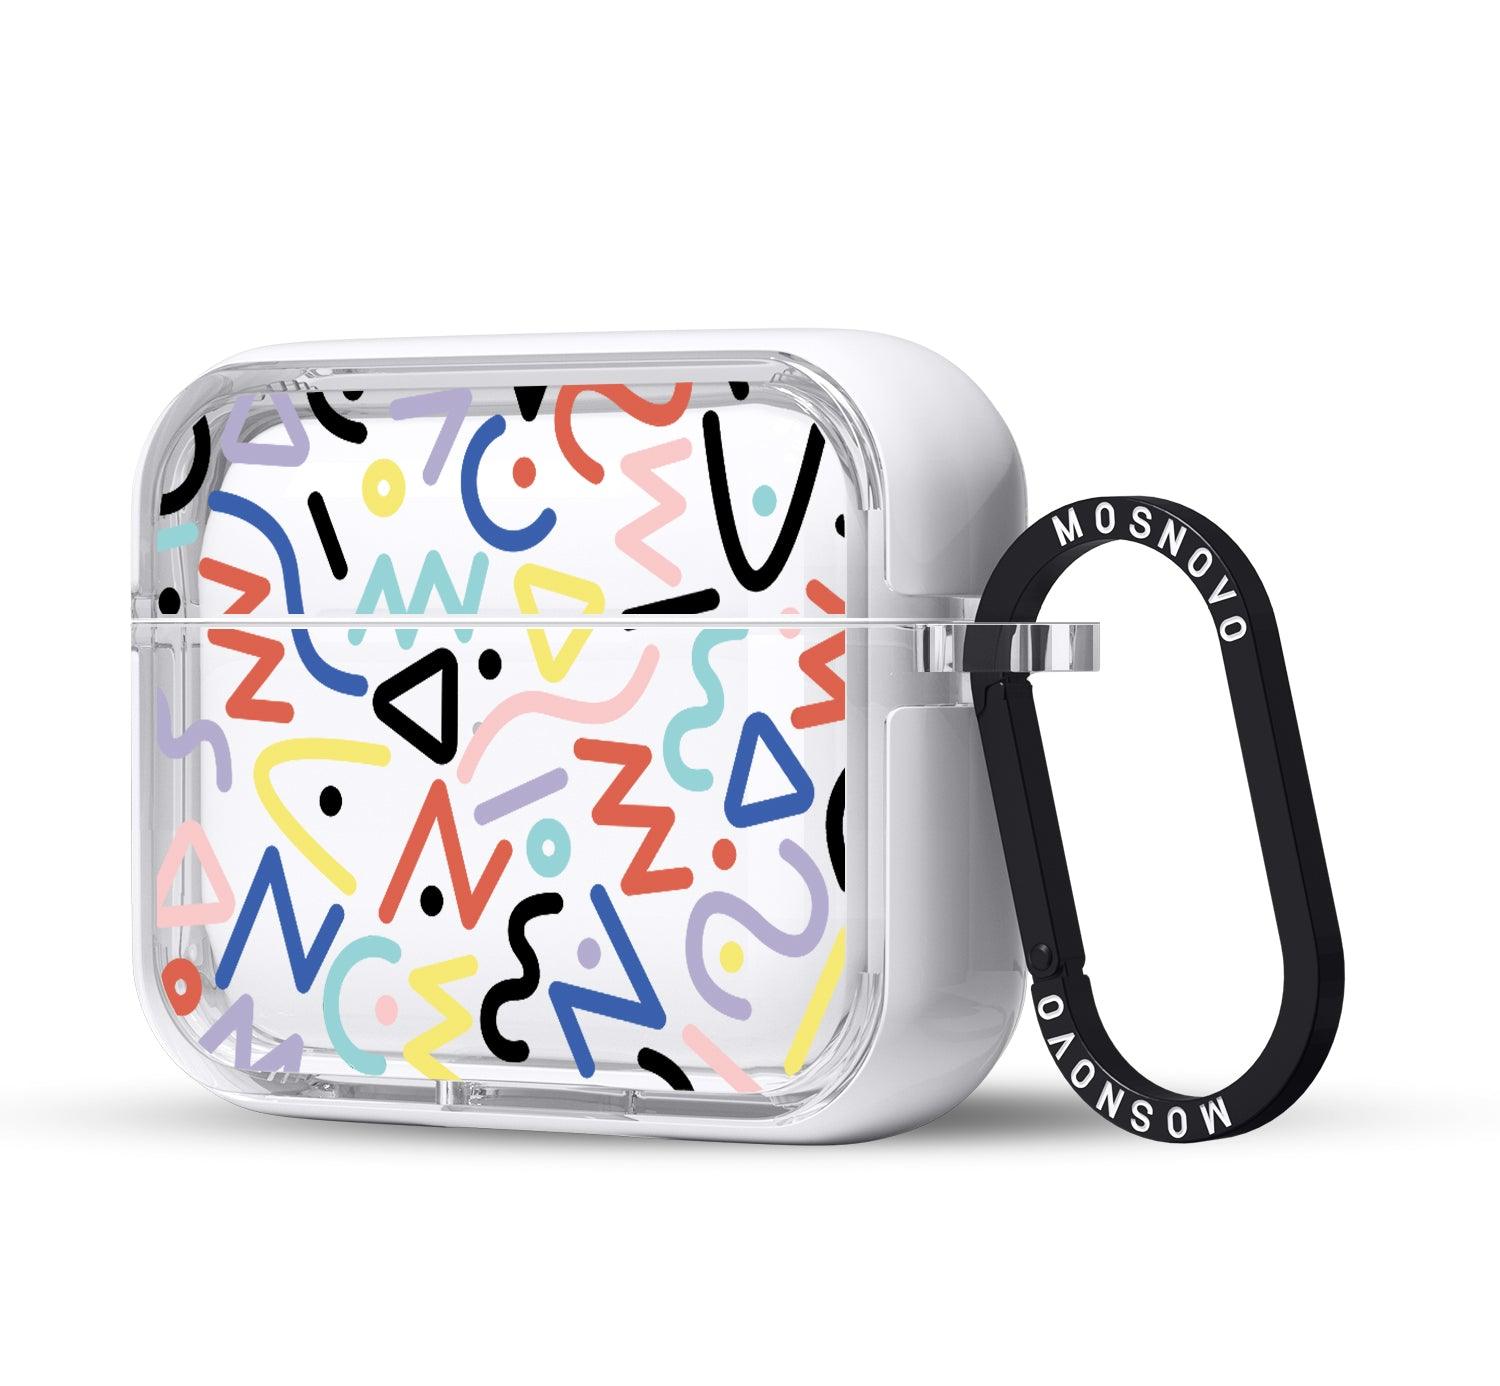 Doodle Art AirPods Pro 2 Case (2nd Generation) - MOSNOVO